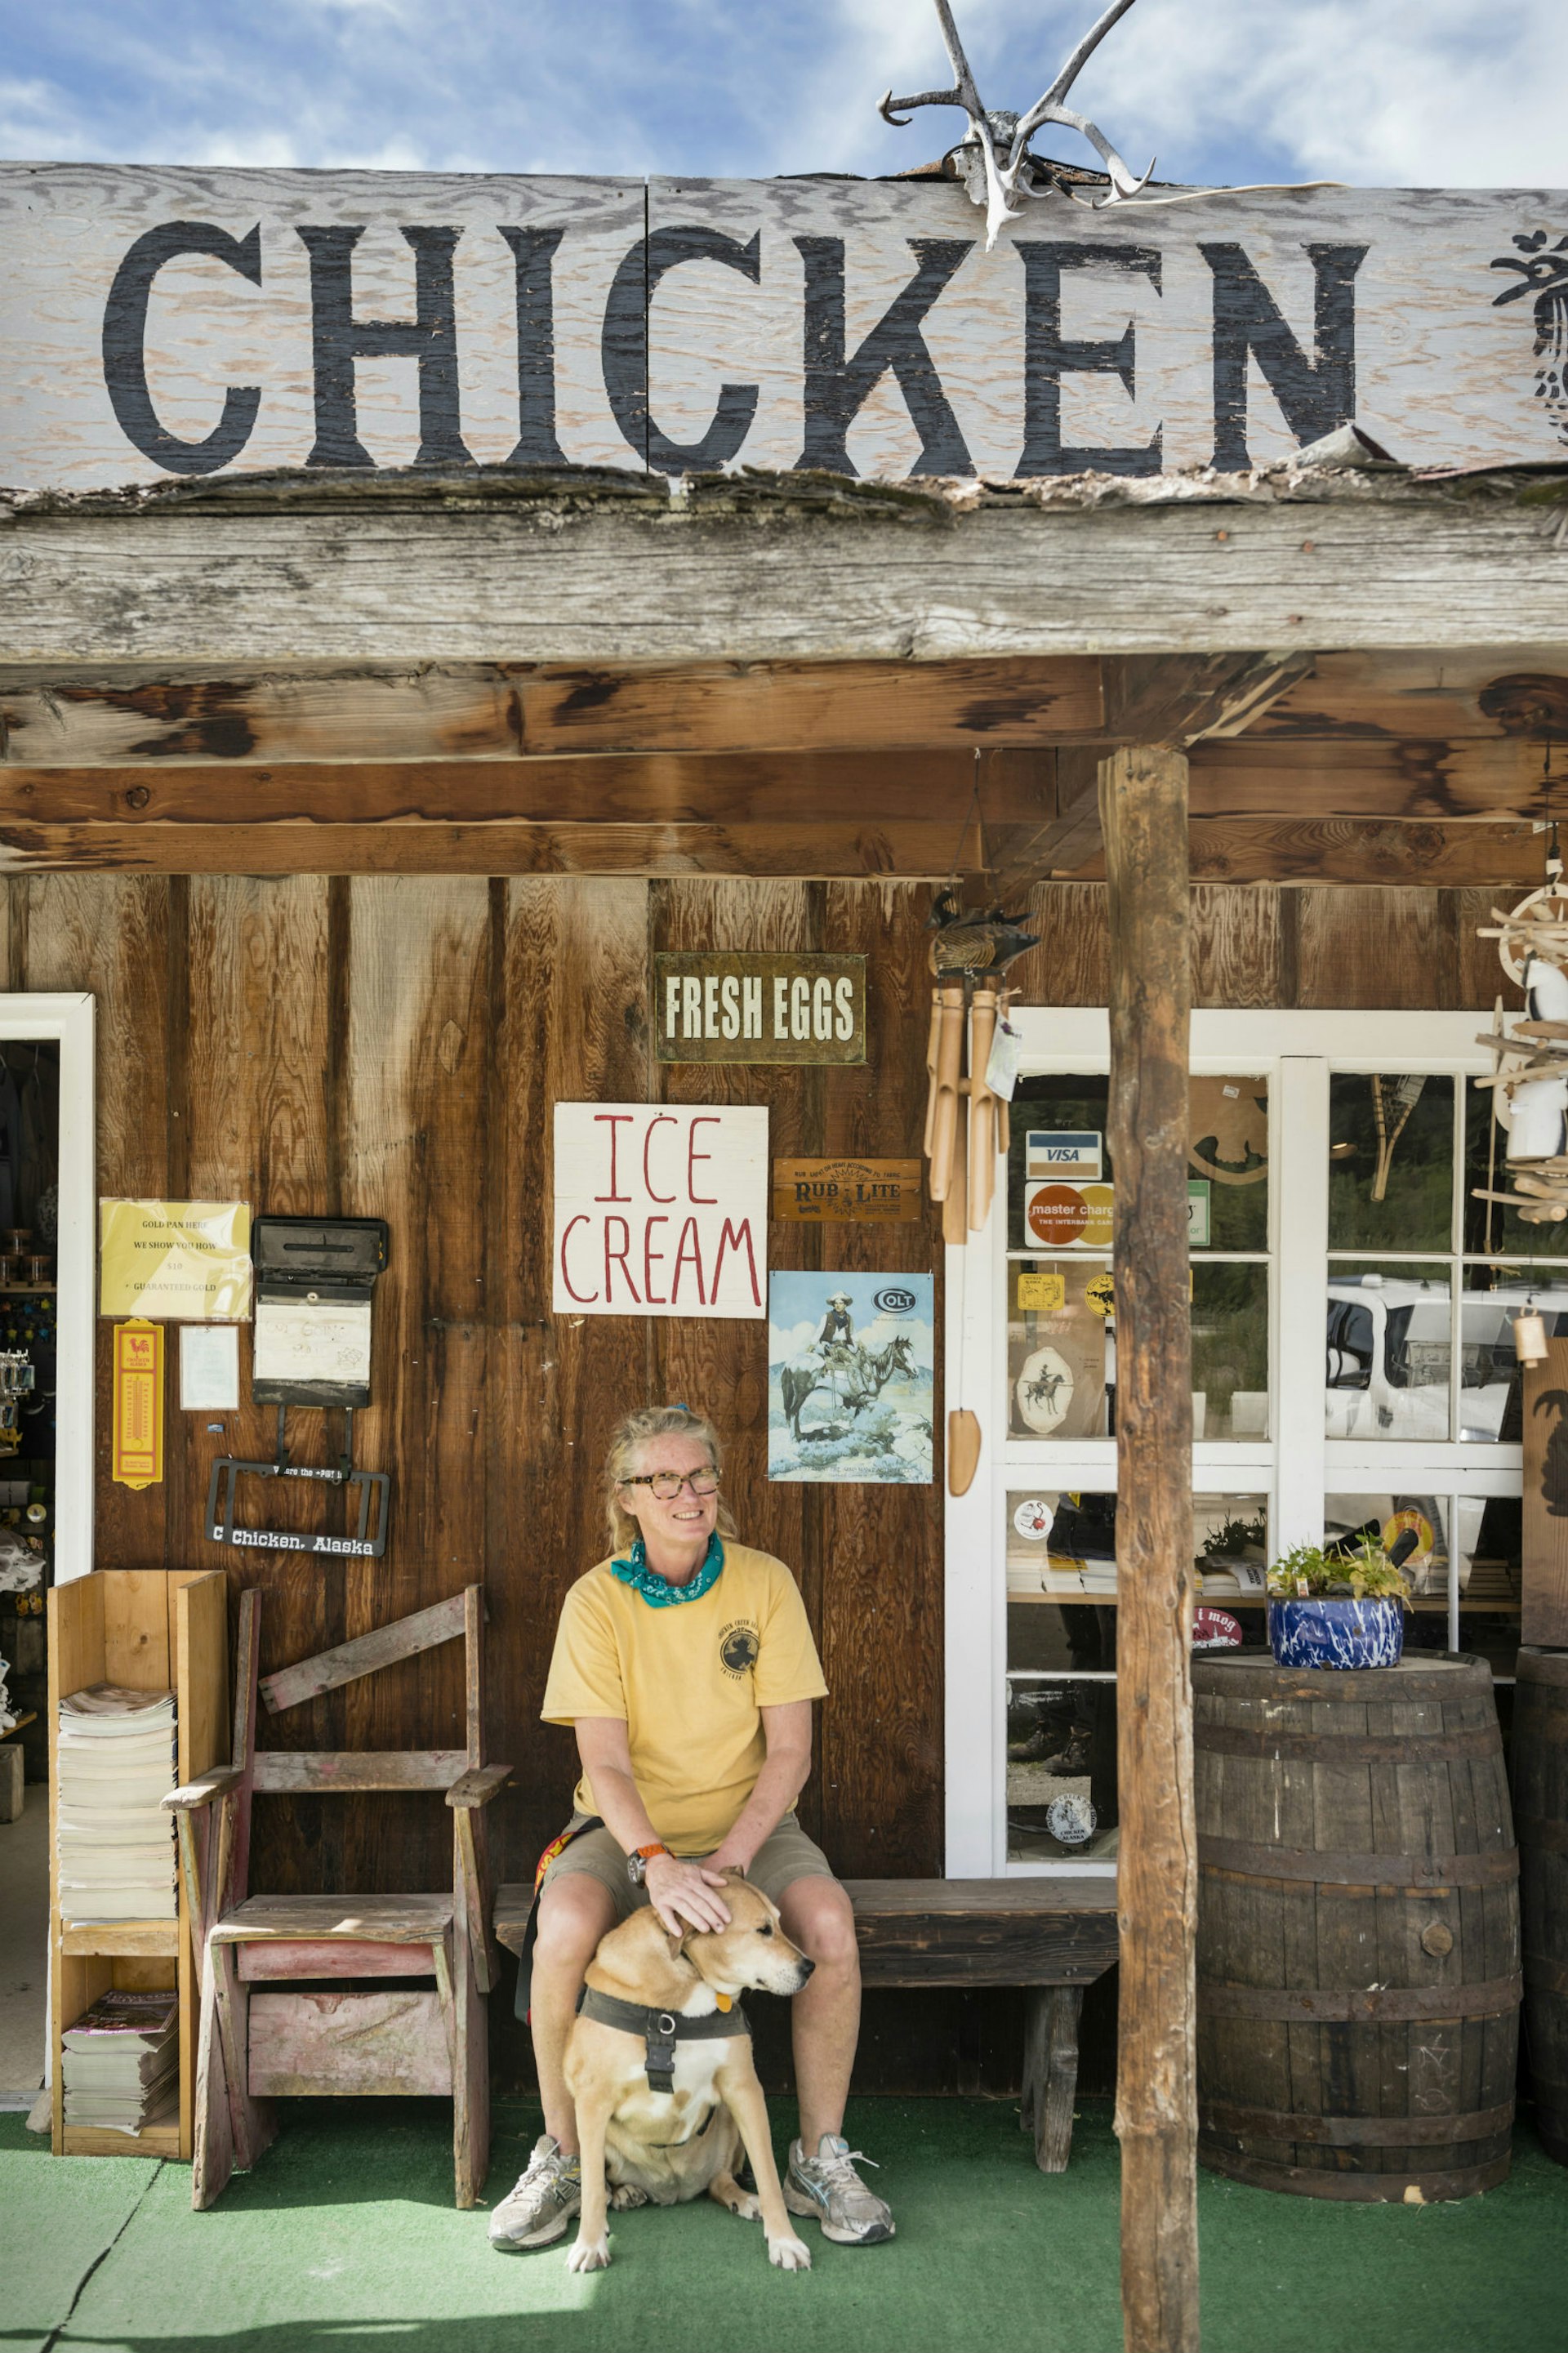 Owner of Downtown Chicken Susan Wiren, and her dog Eyeball © Justin Foulkes / Lonely Planet